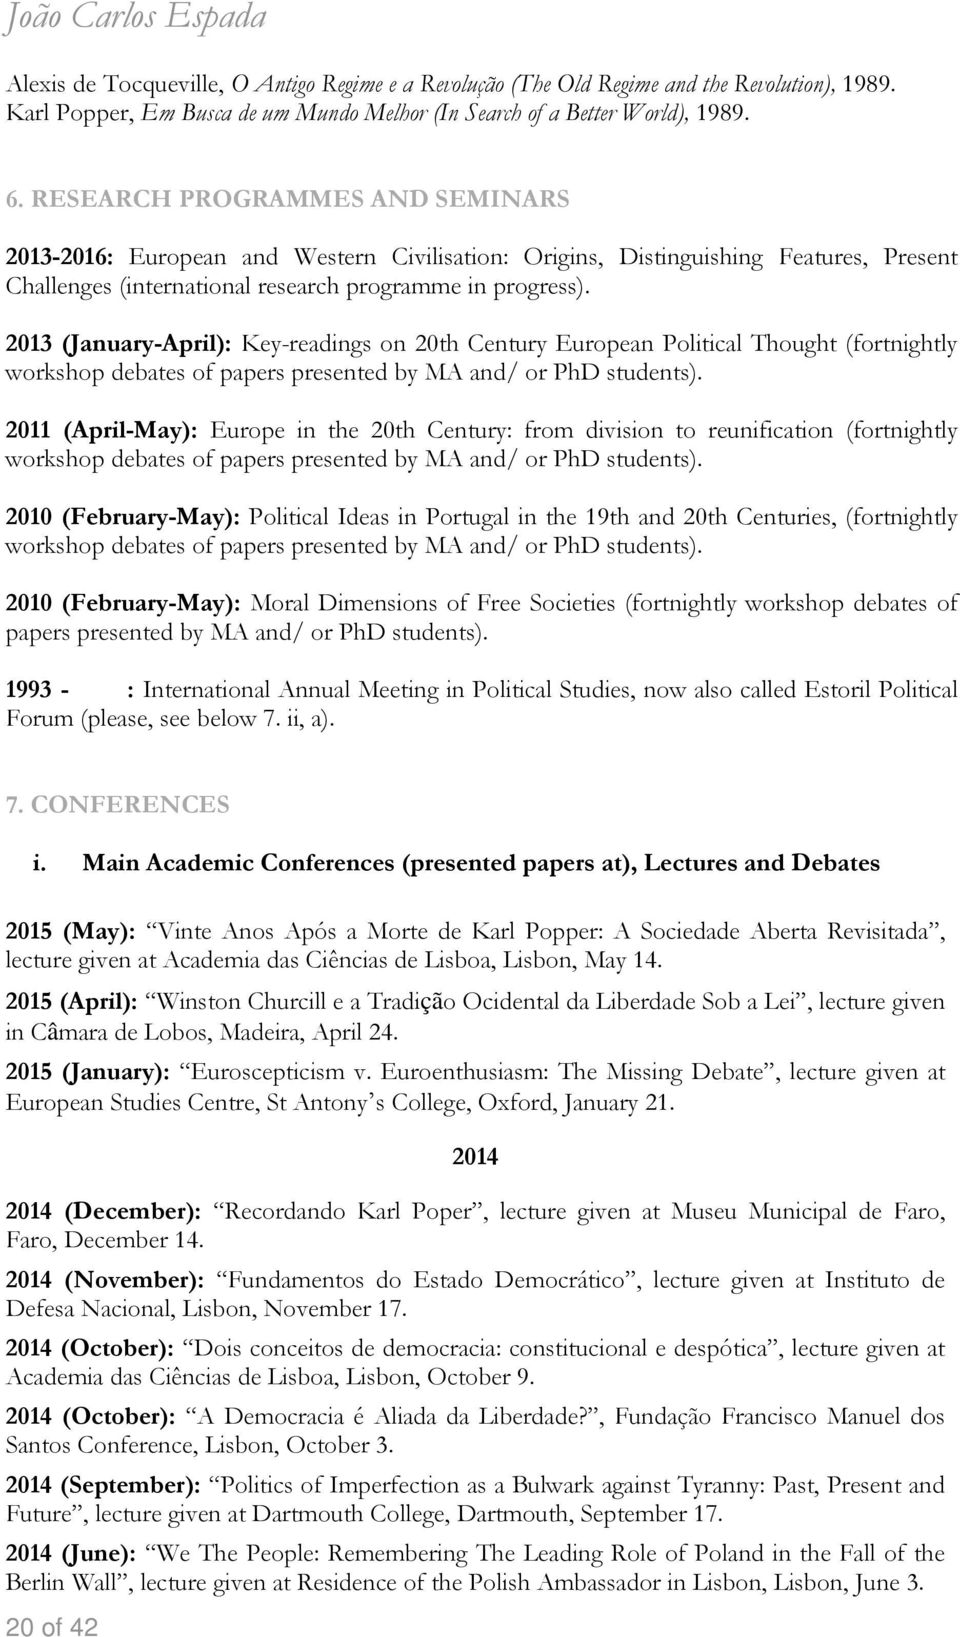 2013 (January-April): Key-readings on 20th Century European Political Thought (fortnightly workshop debates of papers presented by MA and/ or PhD students).